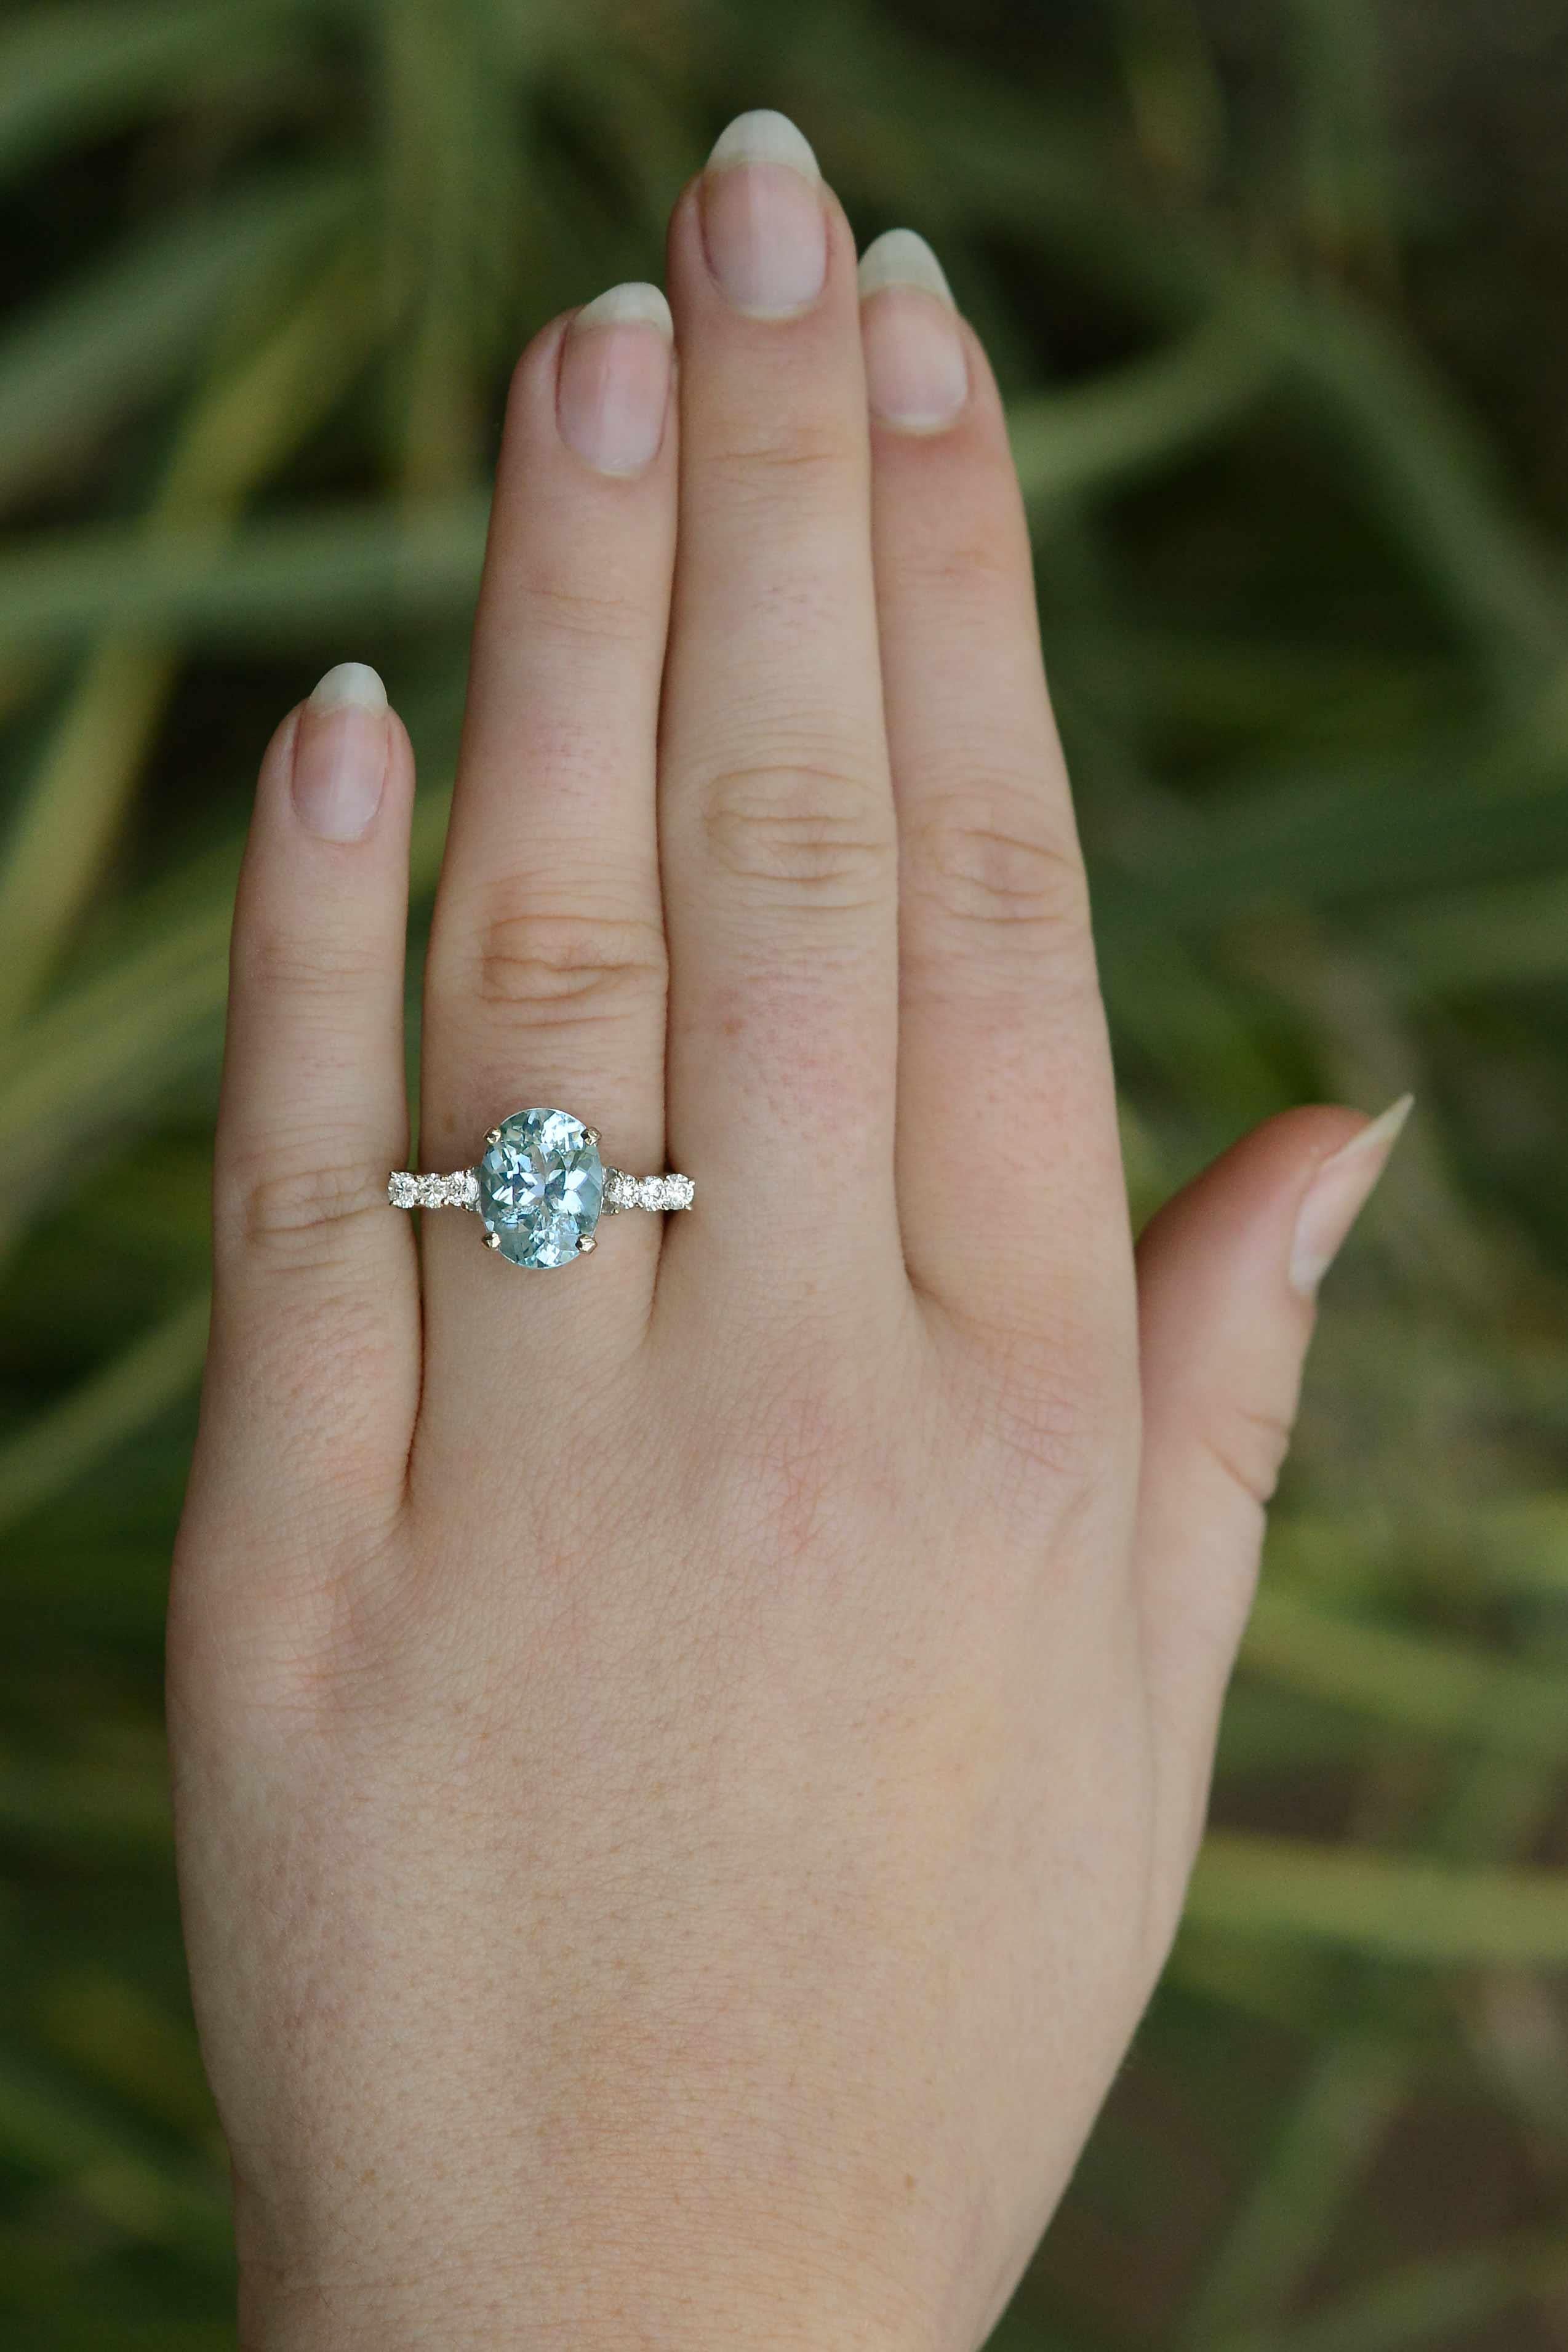 A charming, vintage aquamarine engagement ring displaying deep saturation and a vivid ocean blue color. The oval faceted oceanic gemstone is 3.20 carats total with great clarity. 6 round brilliant diamonds are prong set into the graceful 18k white